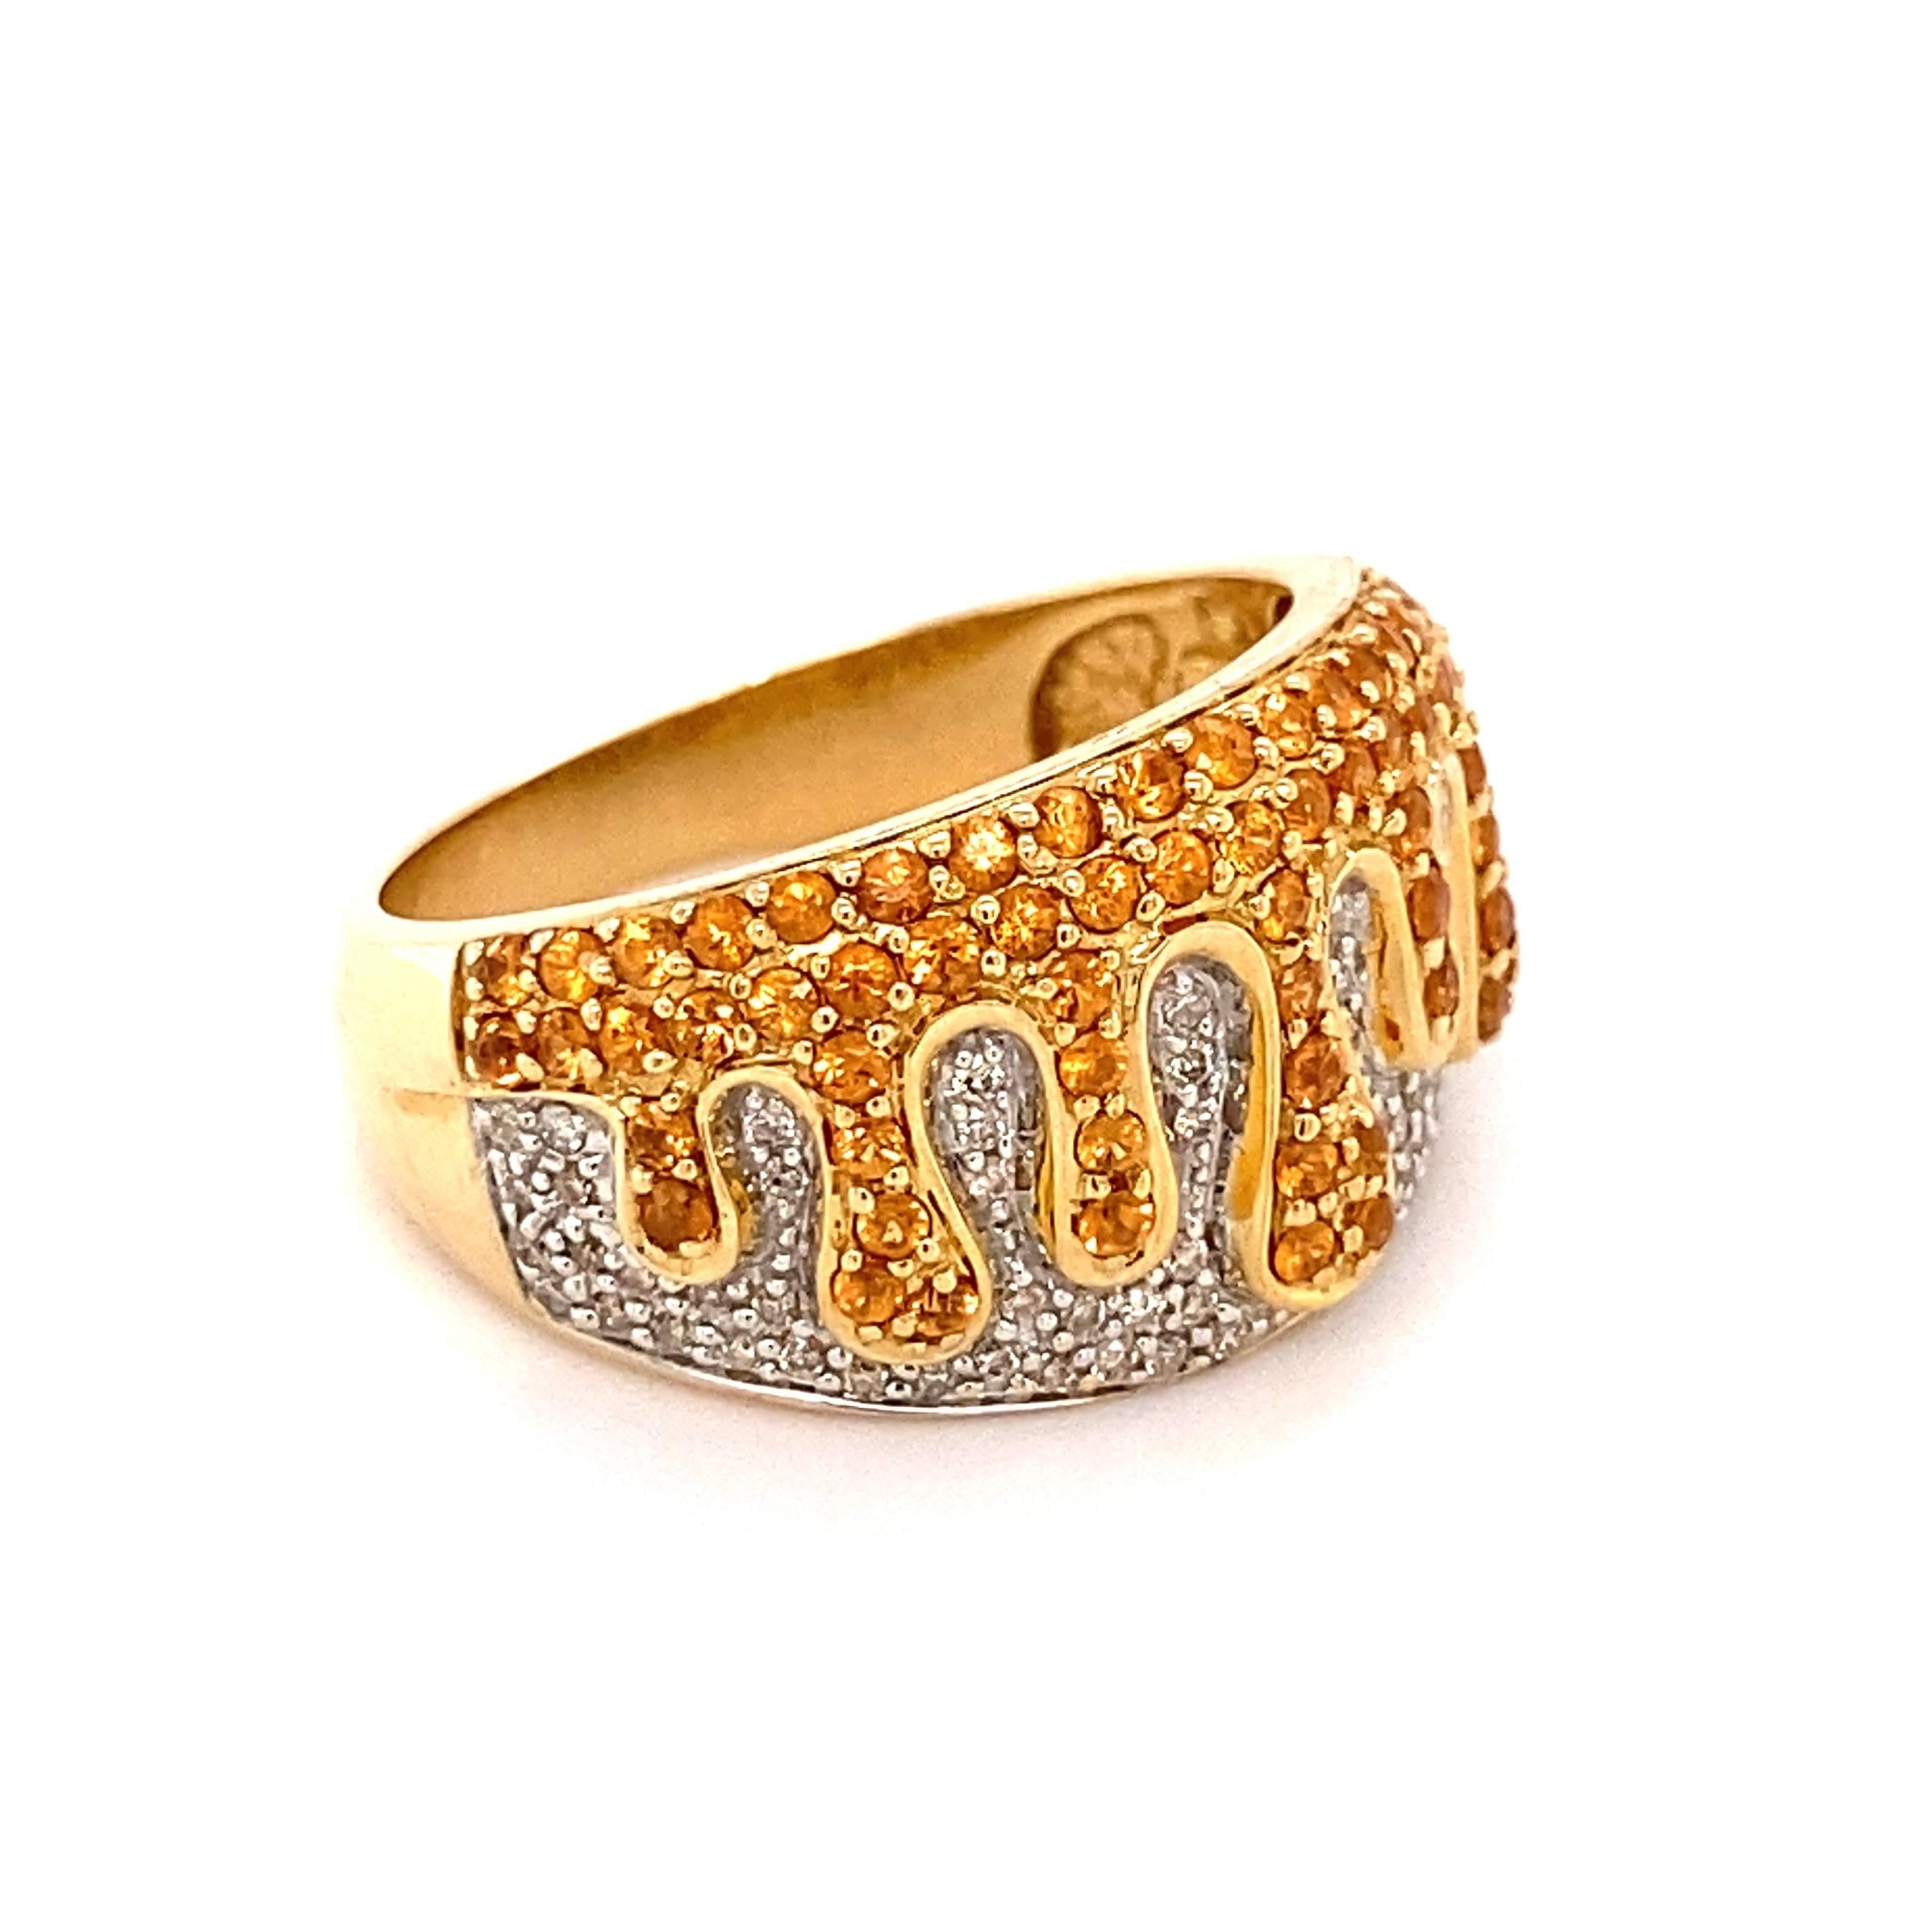 Simply Beautiful! Diamond and Melting Orange Zircon Cocktail Band Ring. Securely Hand set with Melting Orange Zircon approx. 1.50tcw over Round Brilliant-Cut Diamonds weighing approx. 0.60tcw. Hand crafted 14K Yellow Gold mounting. Measuring approx.